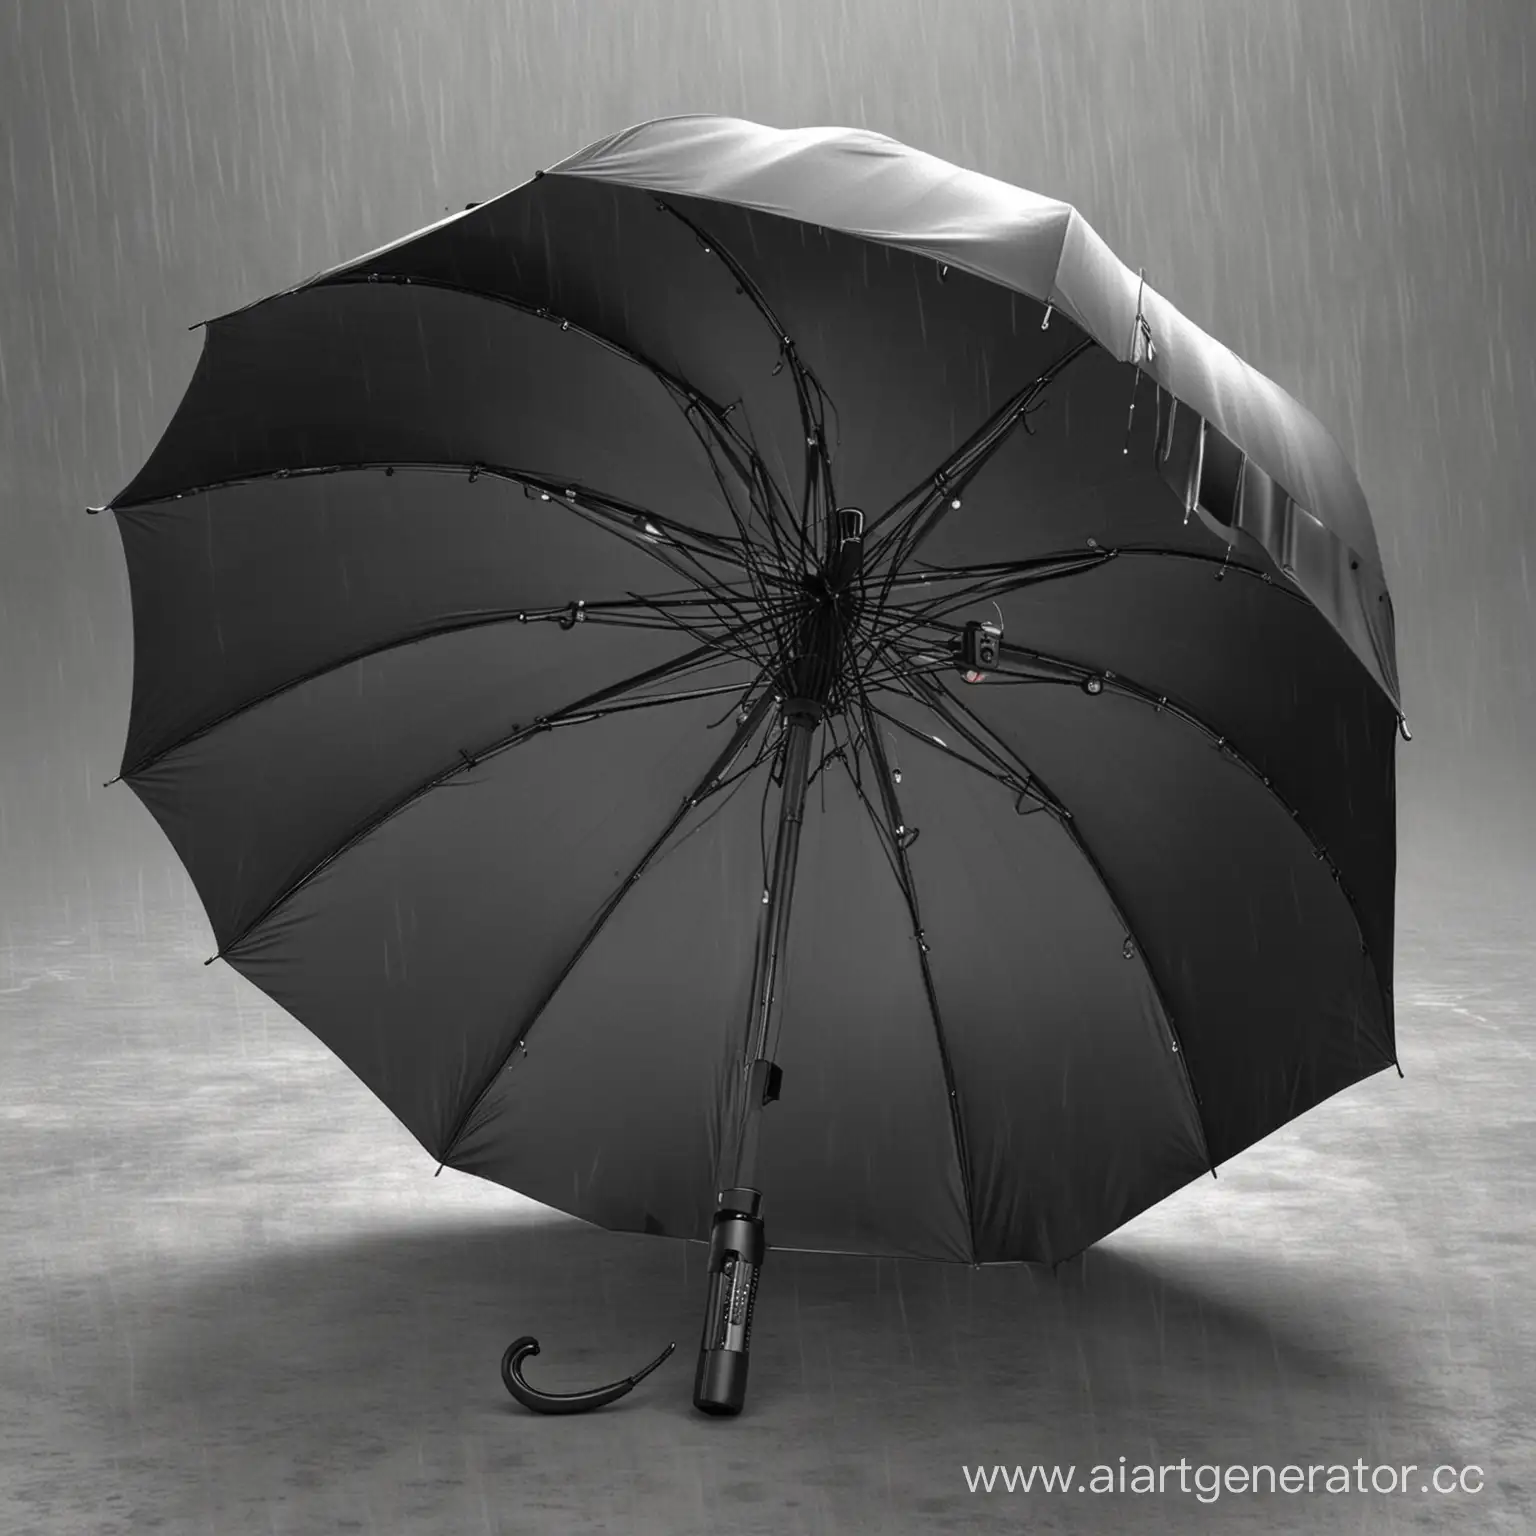 Innovative-Tech-Umbrella-with-Interactive-Features